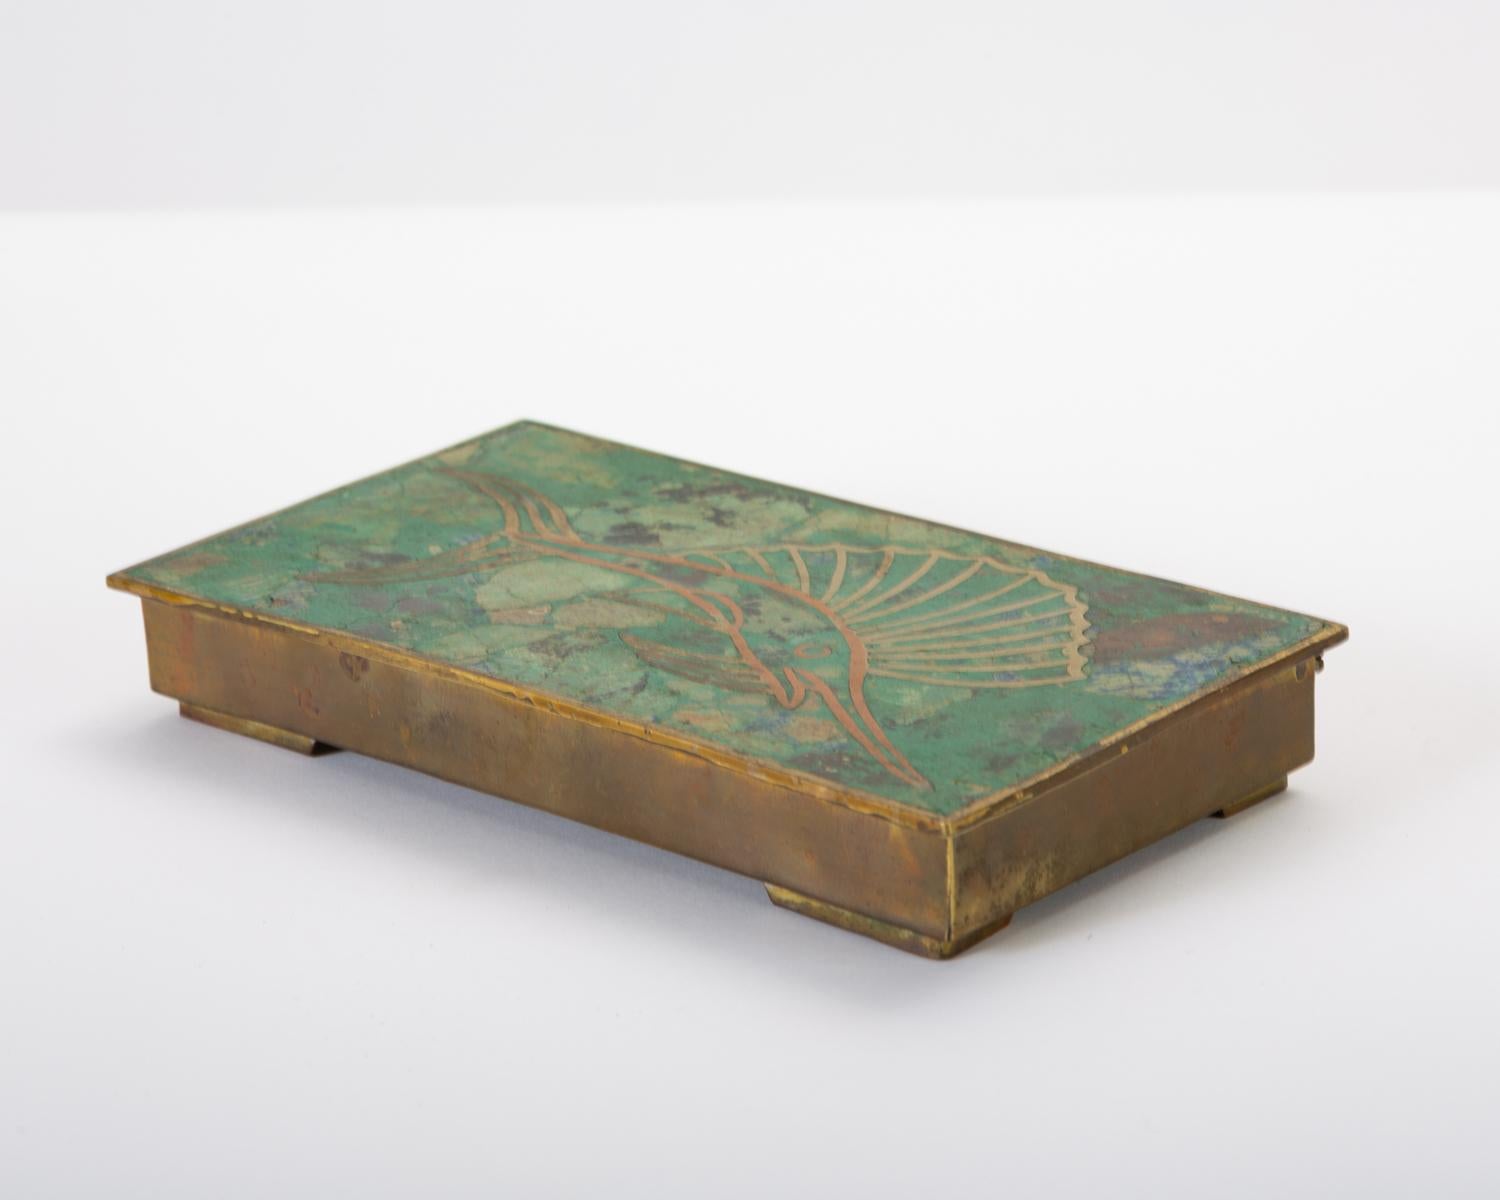 Cloissoné Mexican Brass Box with Resin Inlay Fish